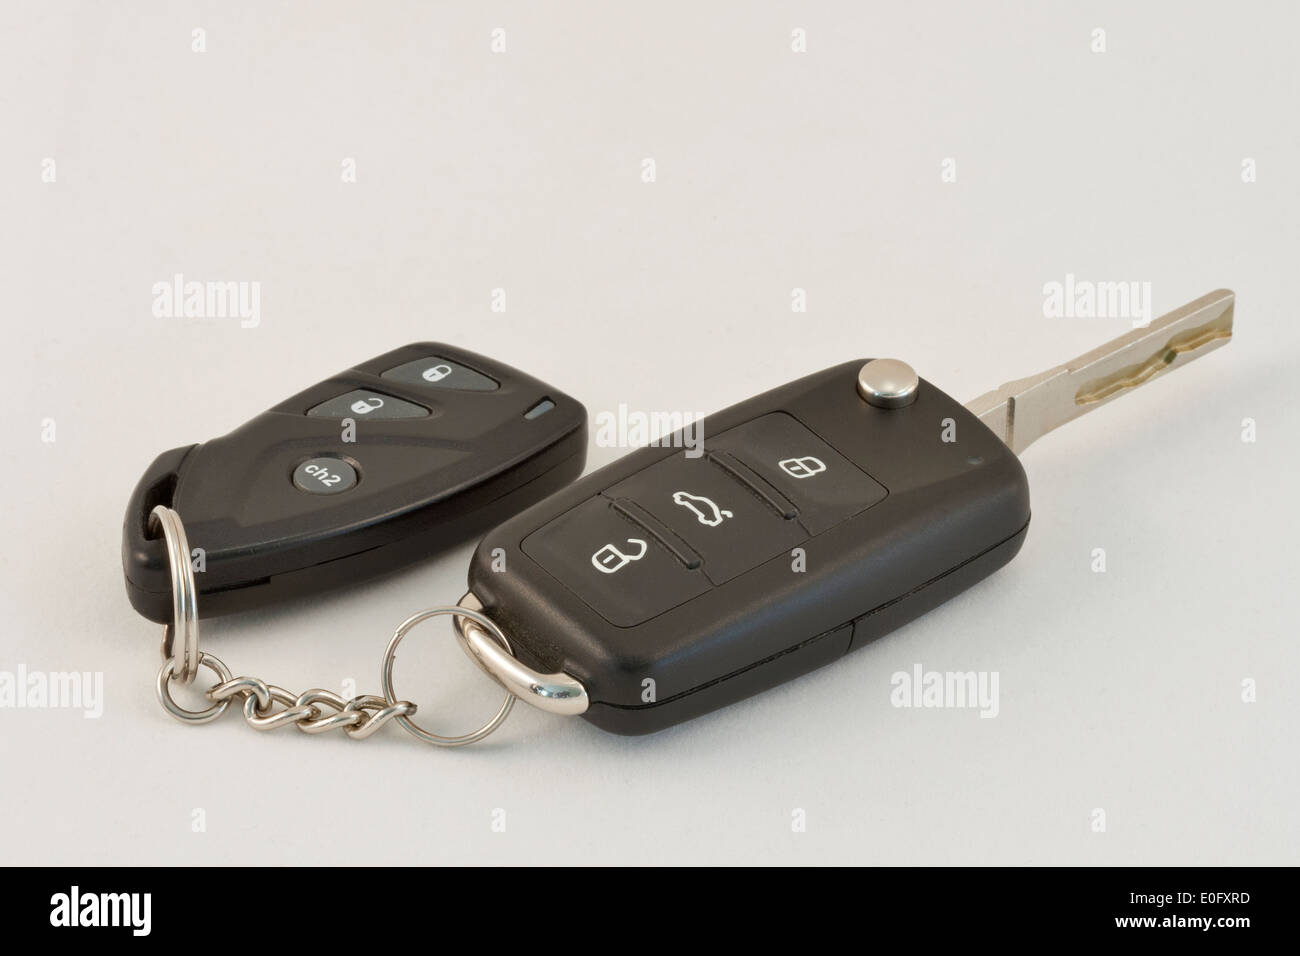 Modern Car Key and Remote against White Background Stock Photo